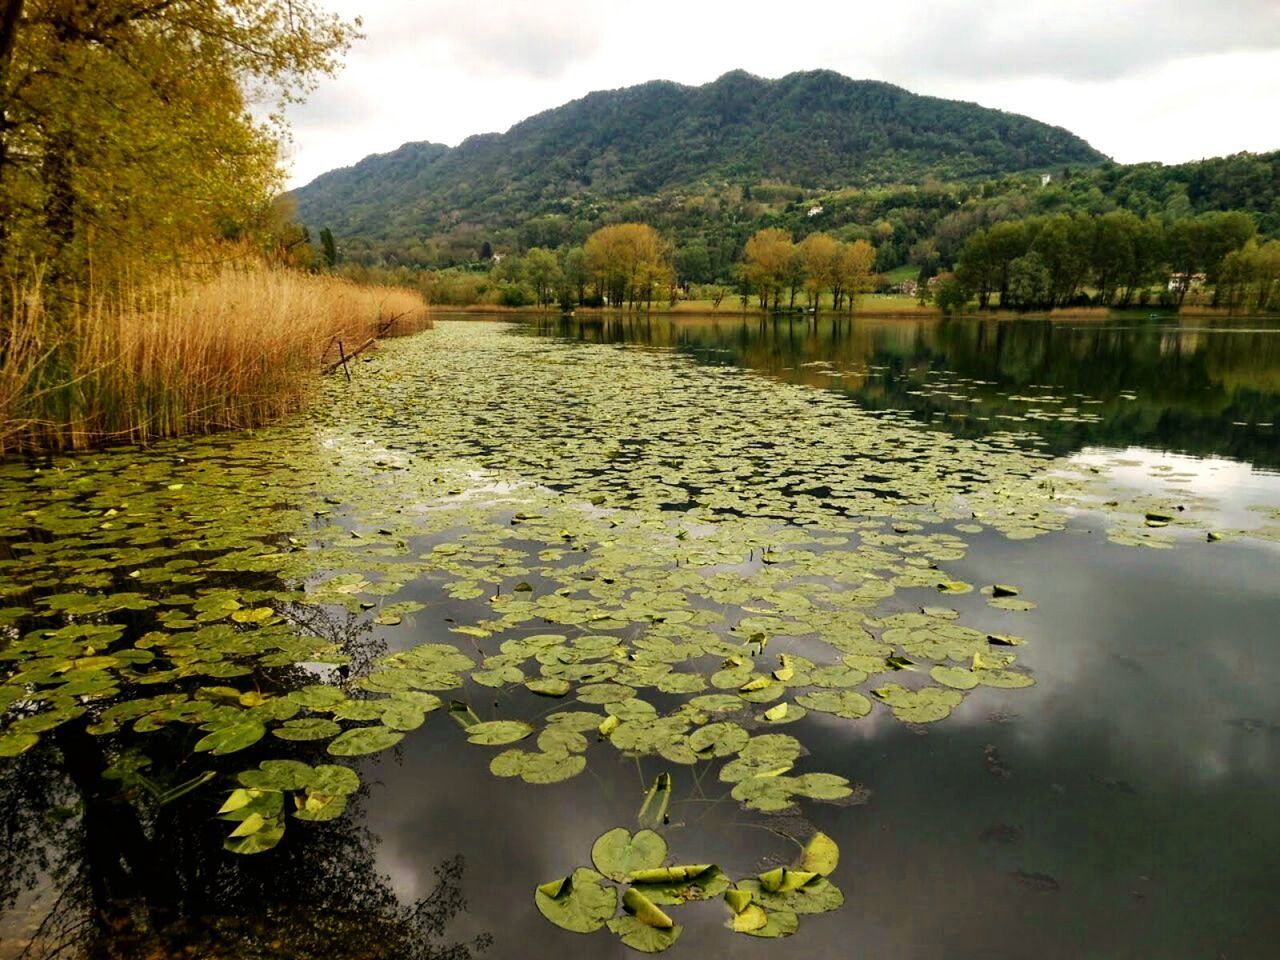 Lily pads floating on pond against mountain